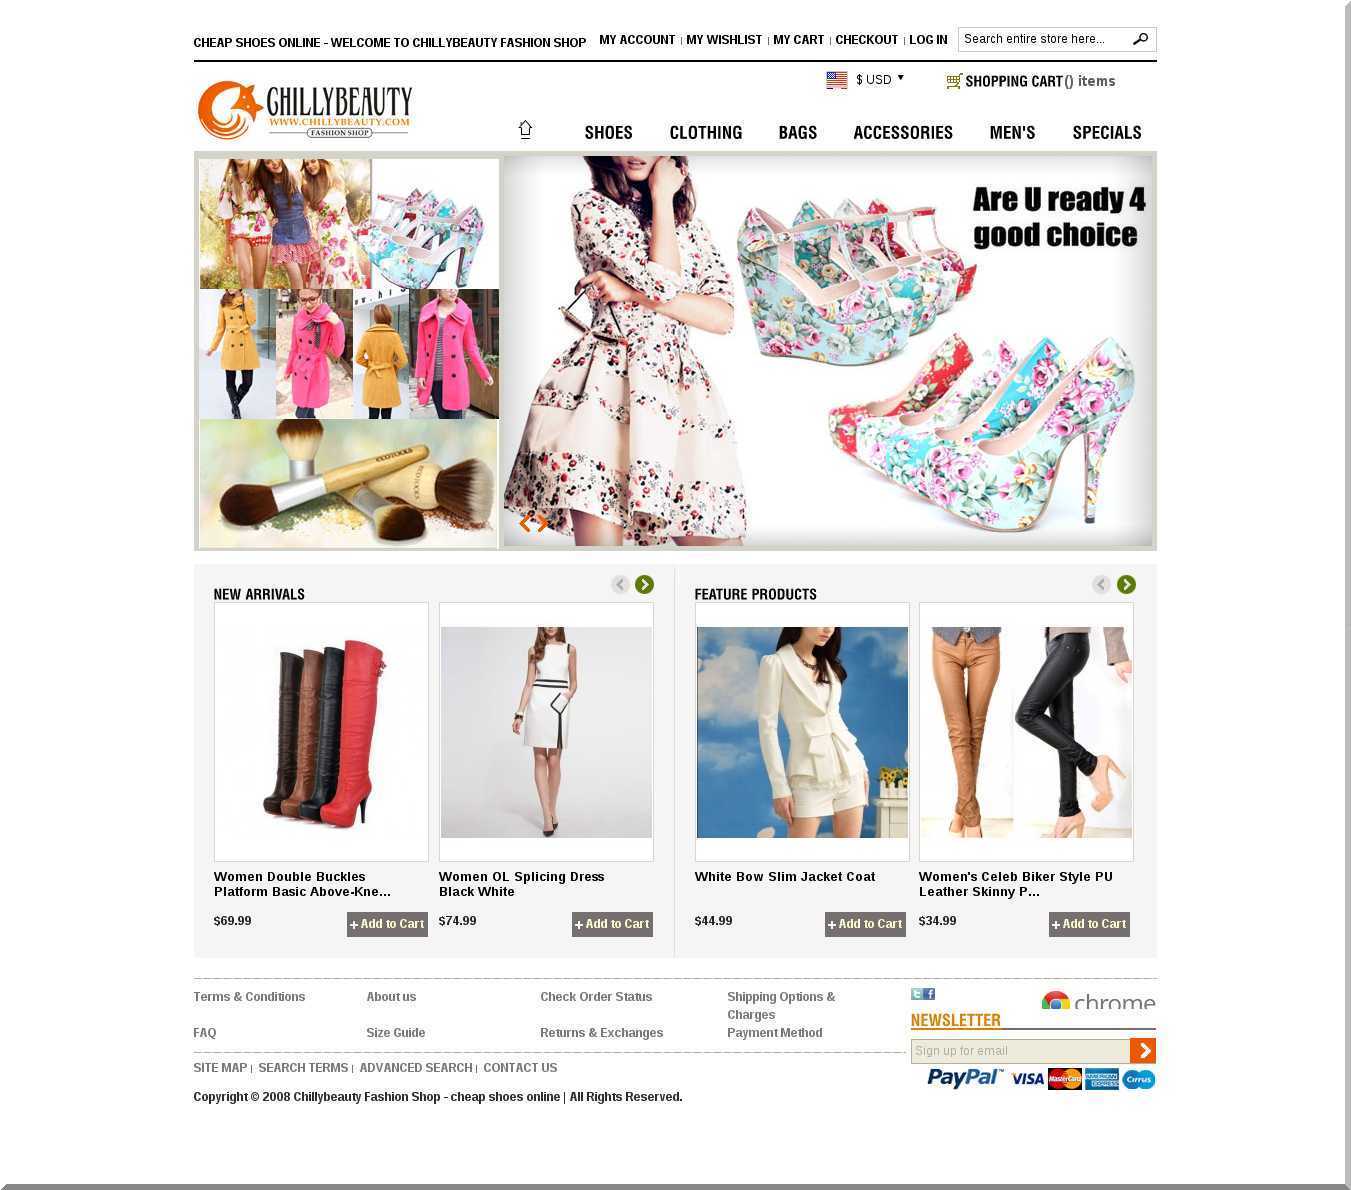 Cheap shoes online   welcome to chillybeauty fashion shop